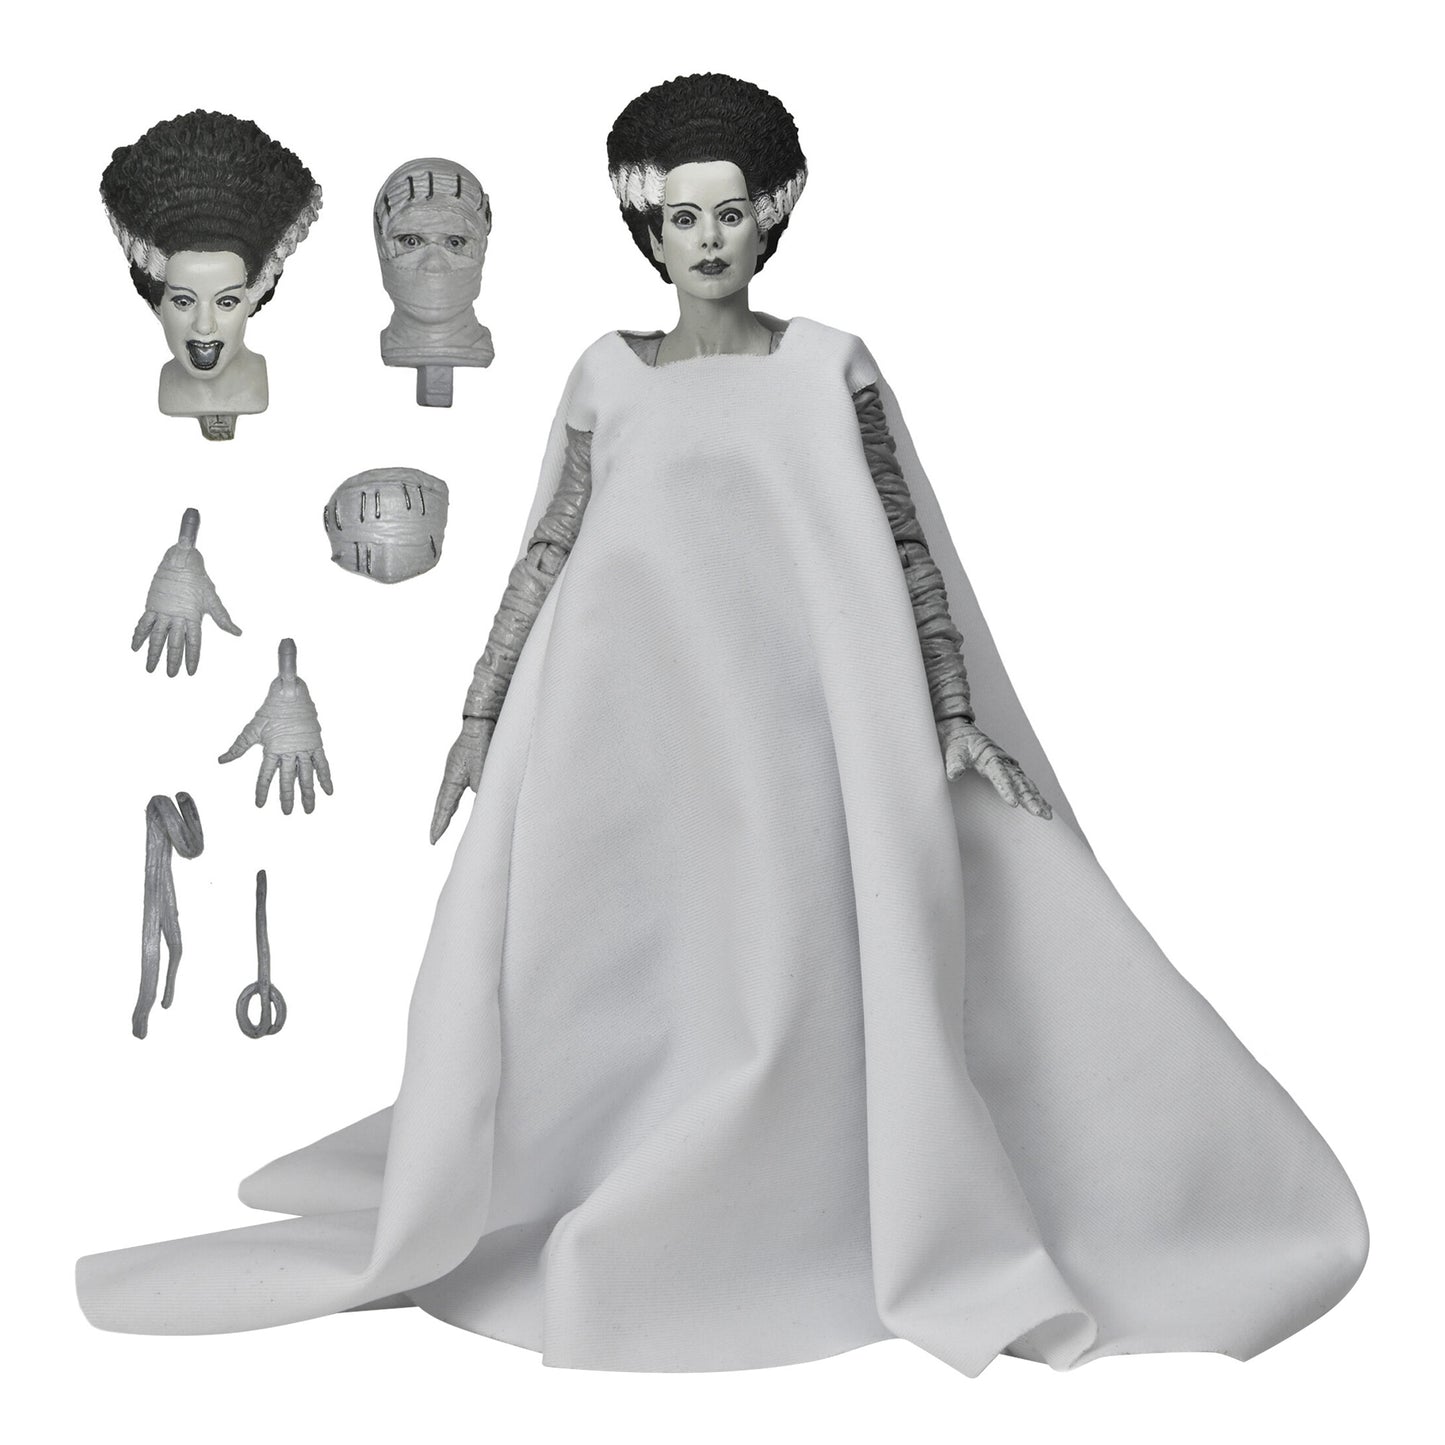 NECA: Universal Monsters - Ultimate Bride of Frankenstein (B&W) 7" Tall Action Figure